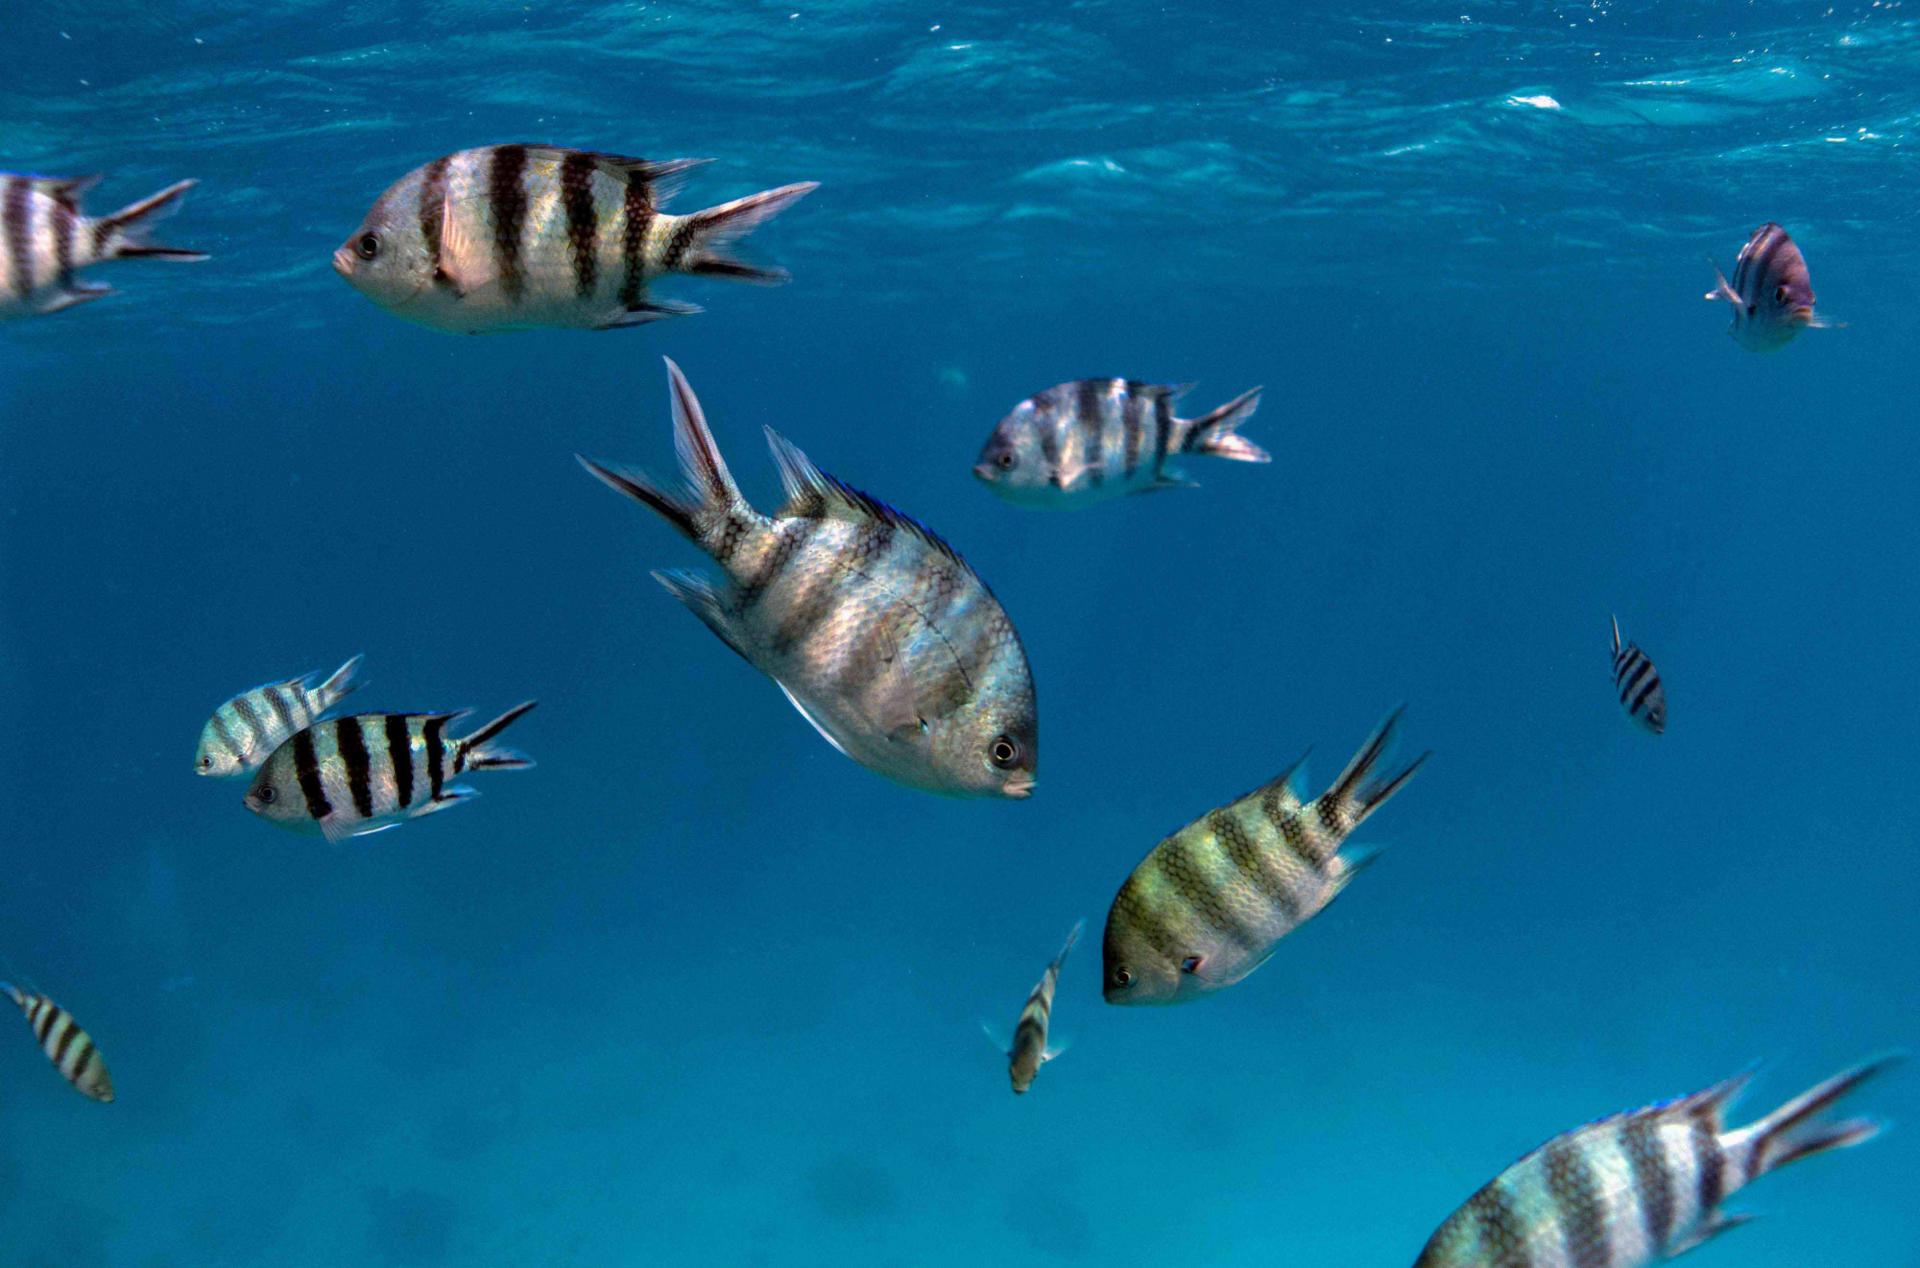  This picture taken on September 7, 2018 shows a male Sergeant major fish (Abudefduf saxatilis) swimming in the Egyptian Red Sea marine reserve of Ras Mohamed, off the southern tip of the Sinai peninsula